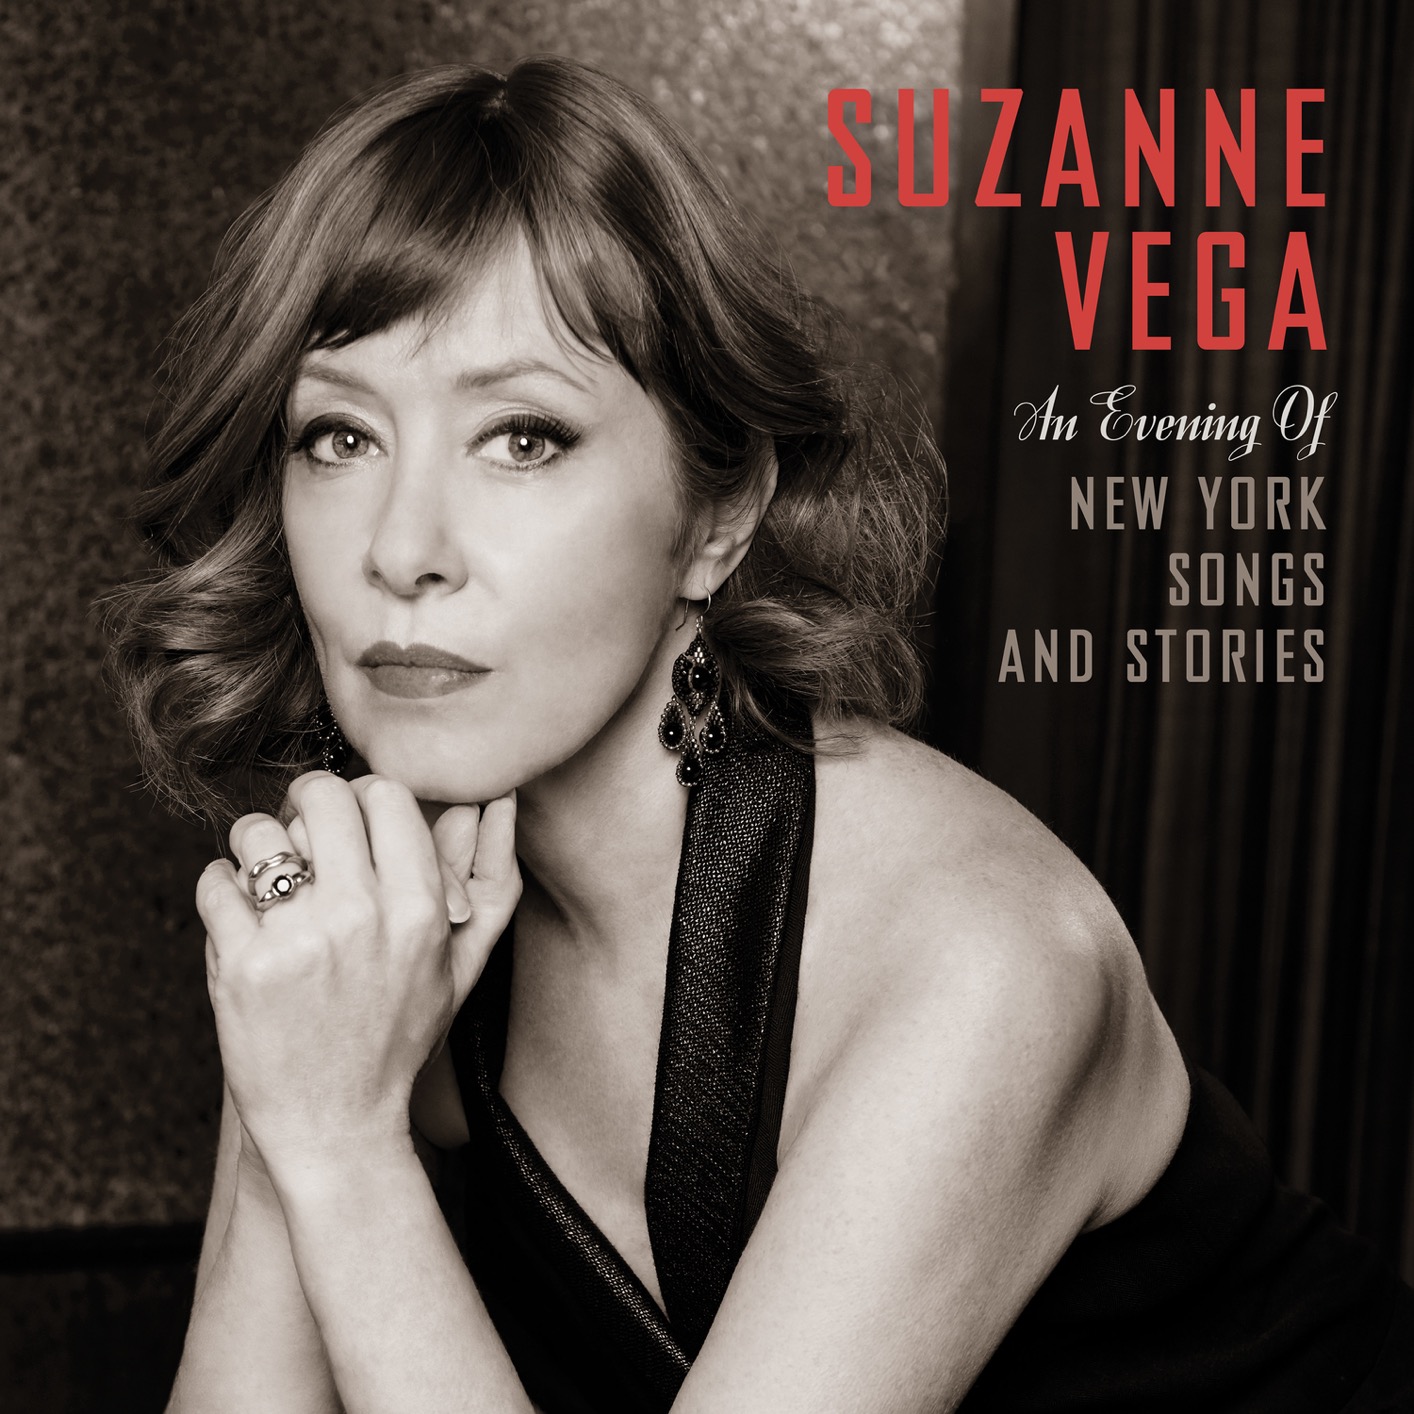 Suzanne Vega - An Evening of New York Songs and Stories (2020) [FLAC 24bit/44,1kHz]